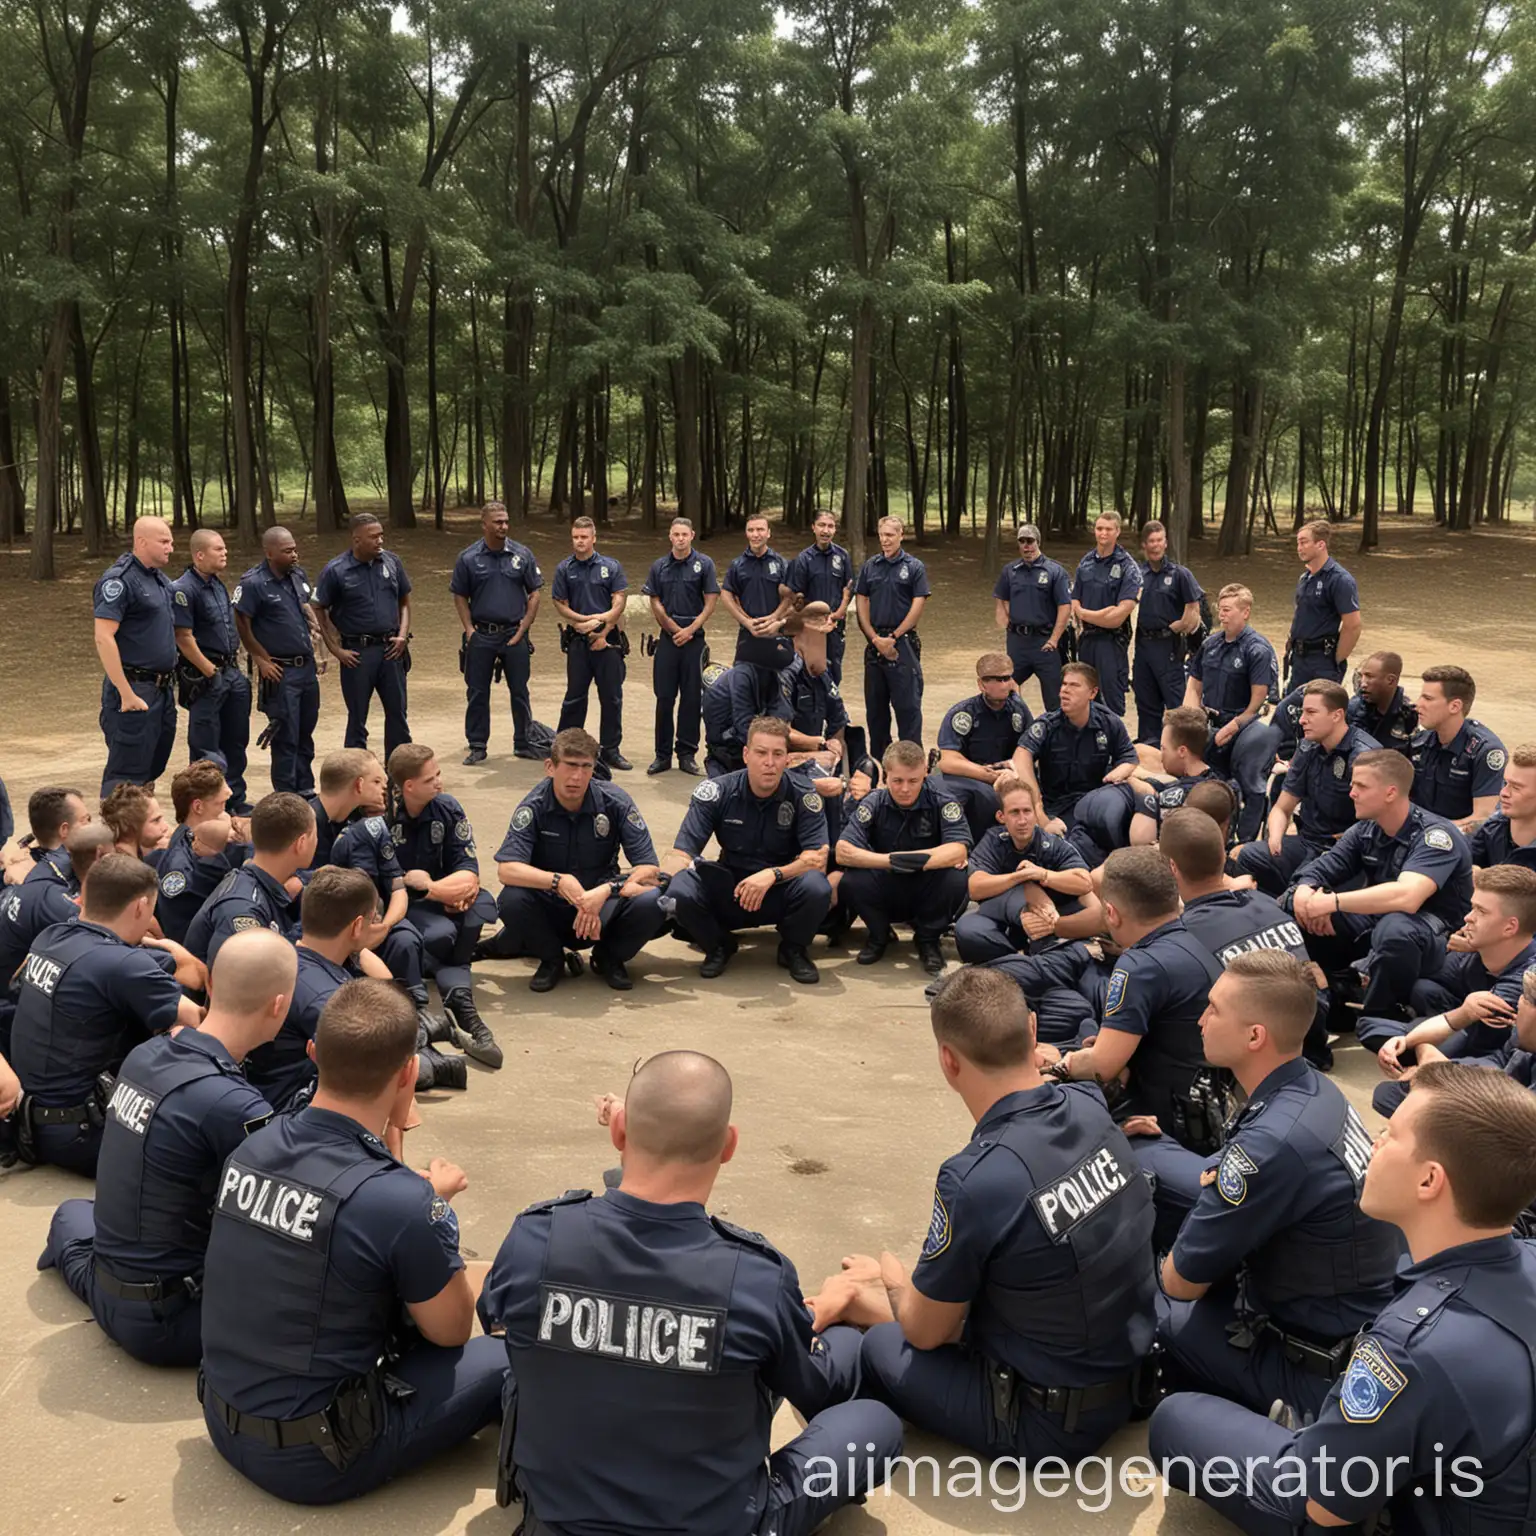 Police-Officer-Briefing-Squad-Members-Before-Deployment